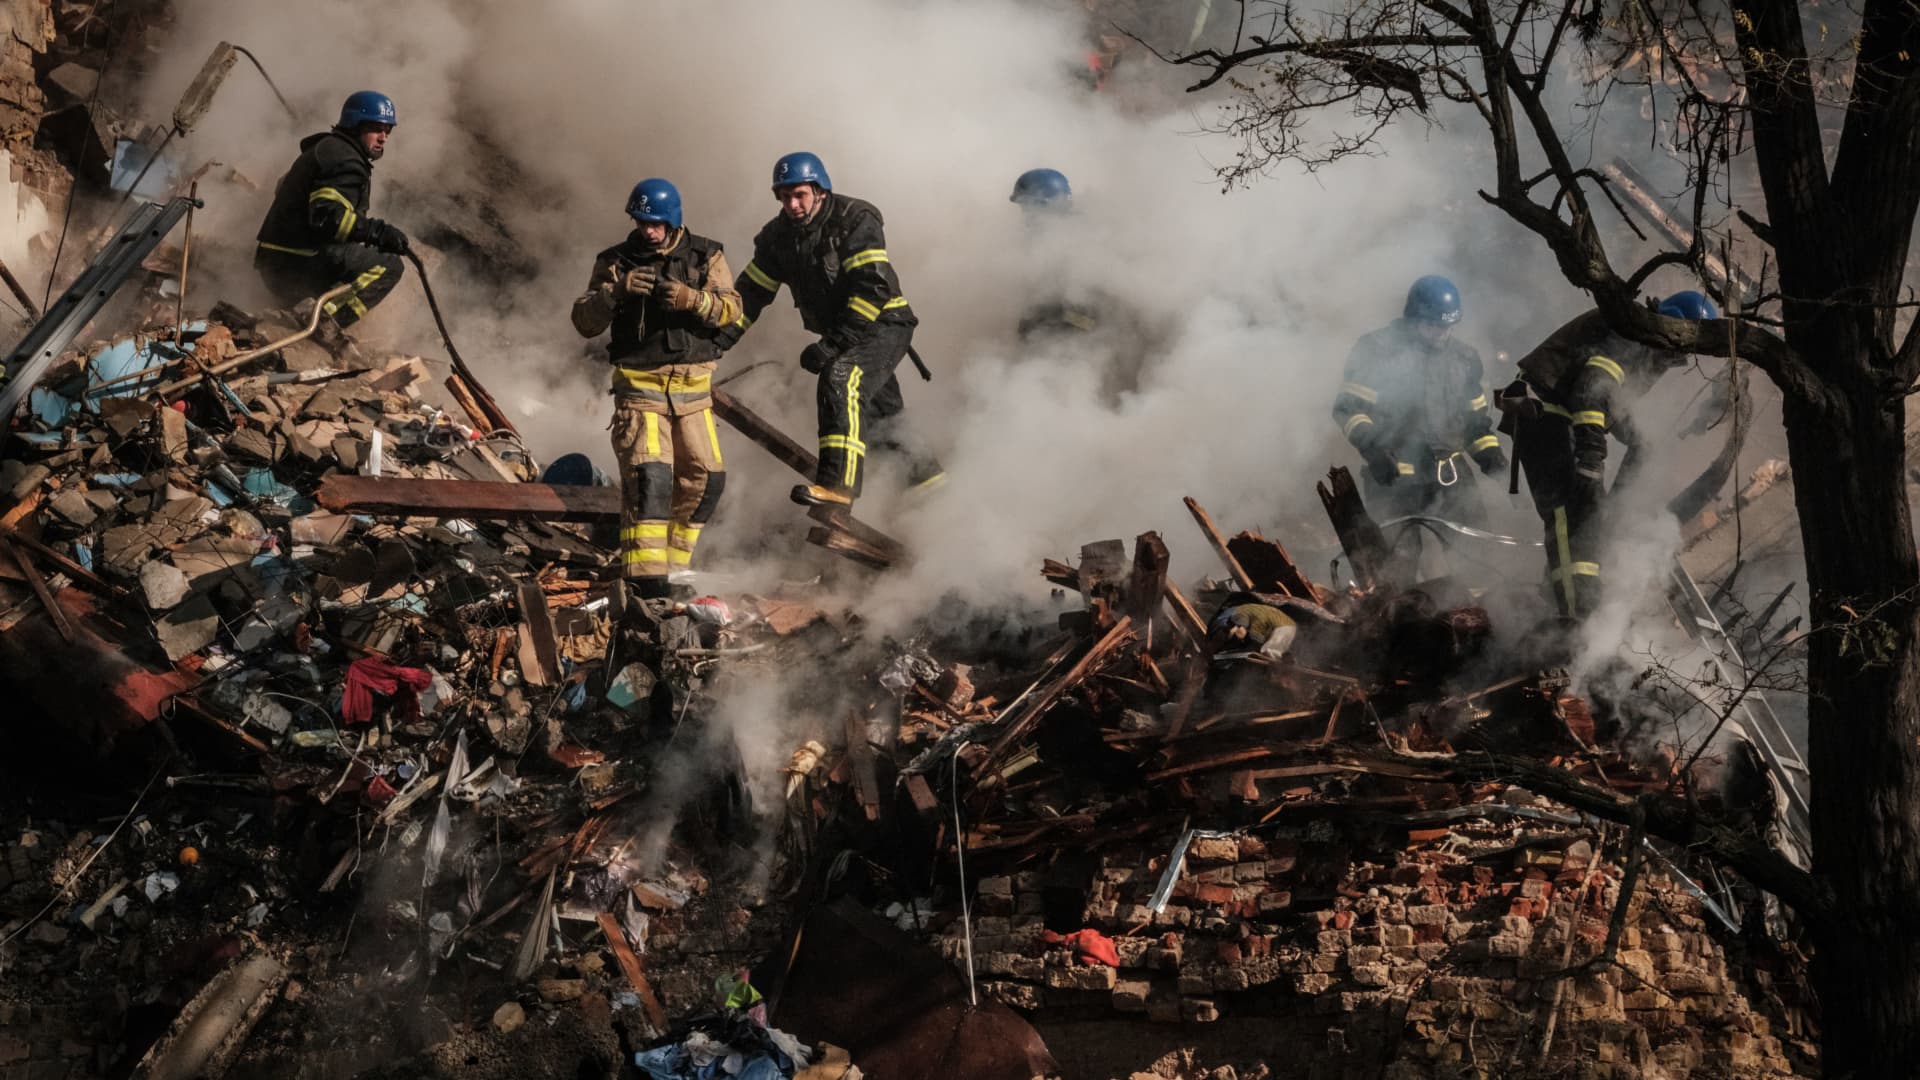 Ukrainian firefighters work on a destroyed building after a drone attack in Kyiv on Oct. 17, 2022, amid the Russian invasion of Ukraine.